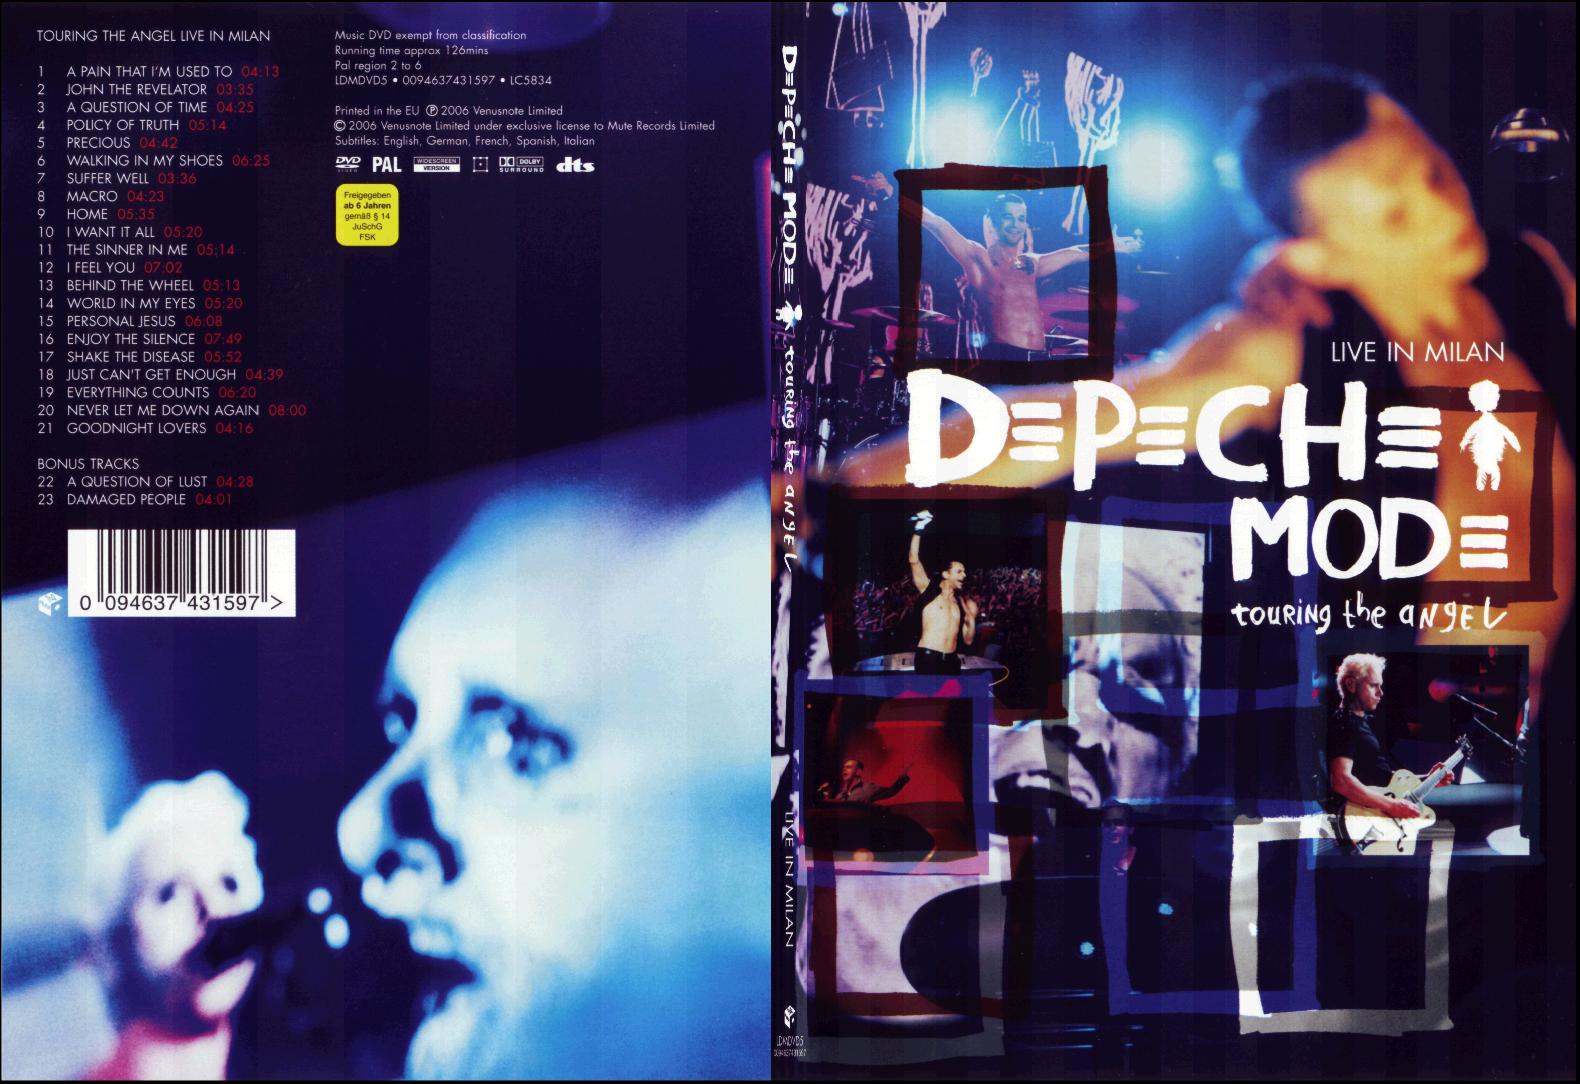 Jaquette DVD Depeche Mode Touring the Angel live in milan 2006 - SLIM